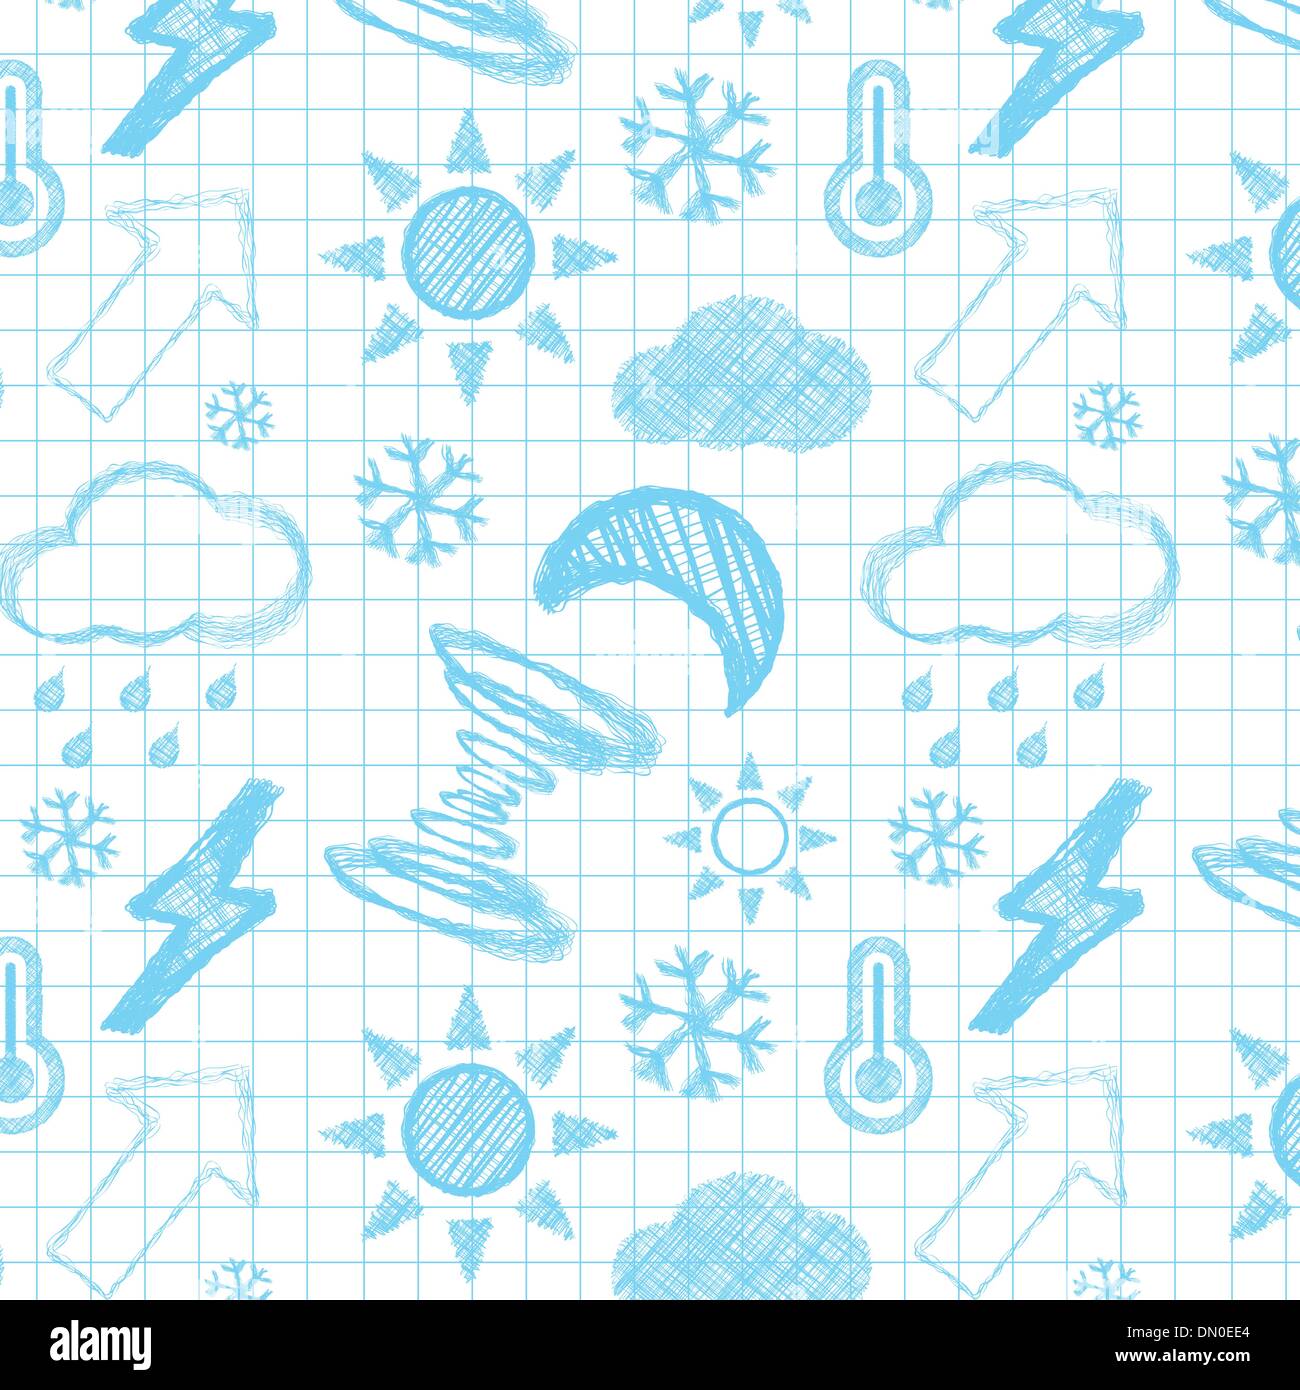 Weather hand drawn seamless pattern. Stock Vector